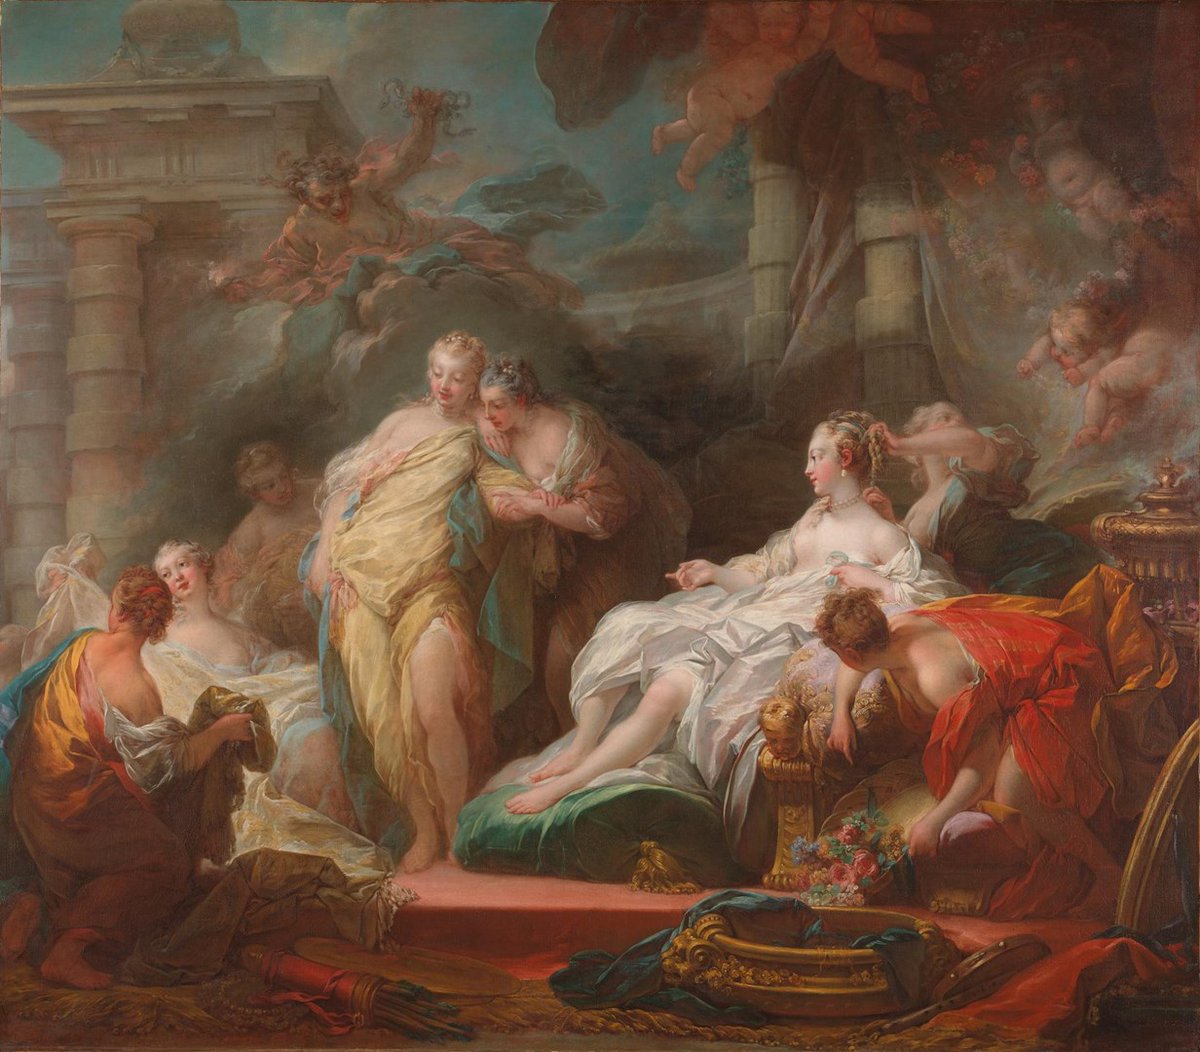 #ClassicsTober Day 10: 'Psyche'. Passing over the obvious, Canova's Cupid and Psyche, here is Jean-Honoré Fragonard's Psyche Showing Her Sisters Her Gifts from Cupid.